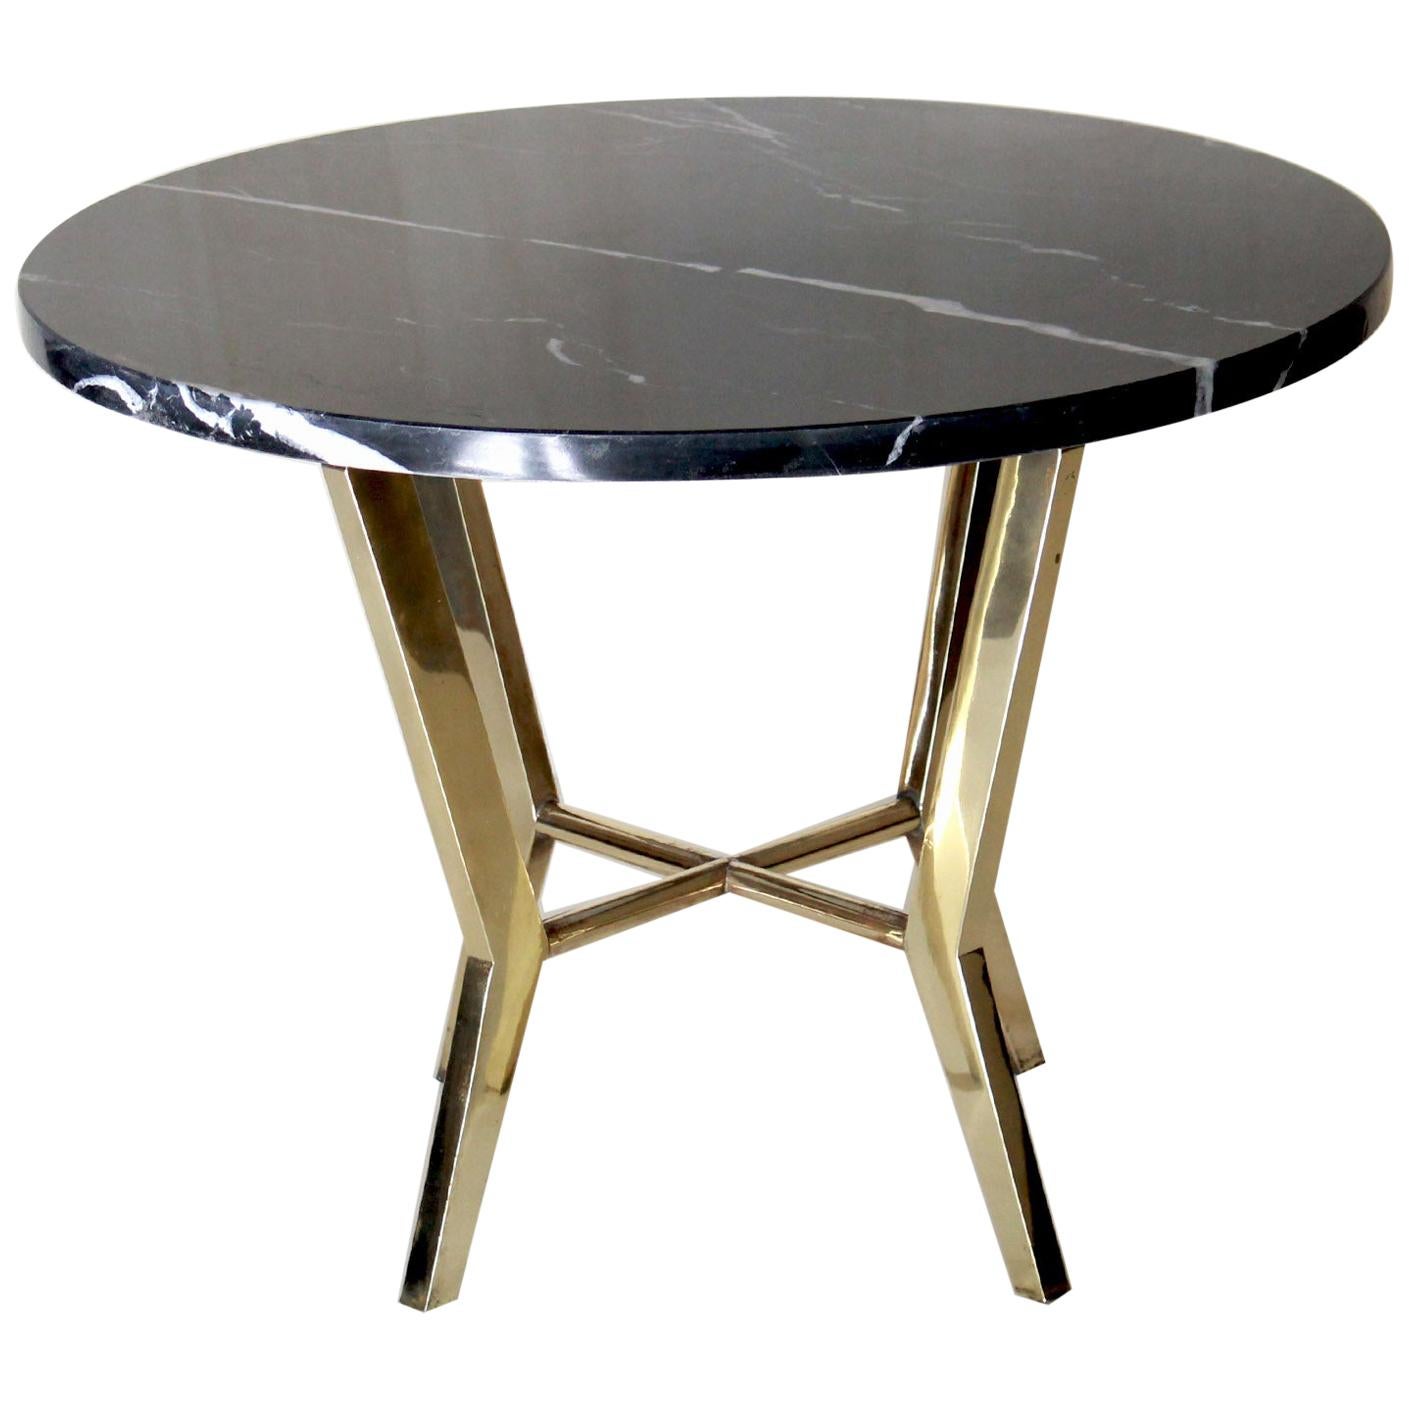 1970s Vintage Coffee Table with Black Marble Top and Brass Base